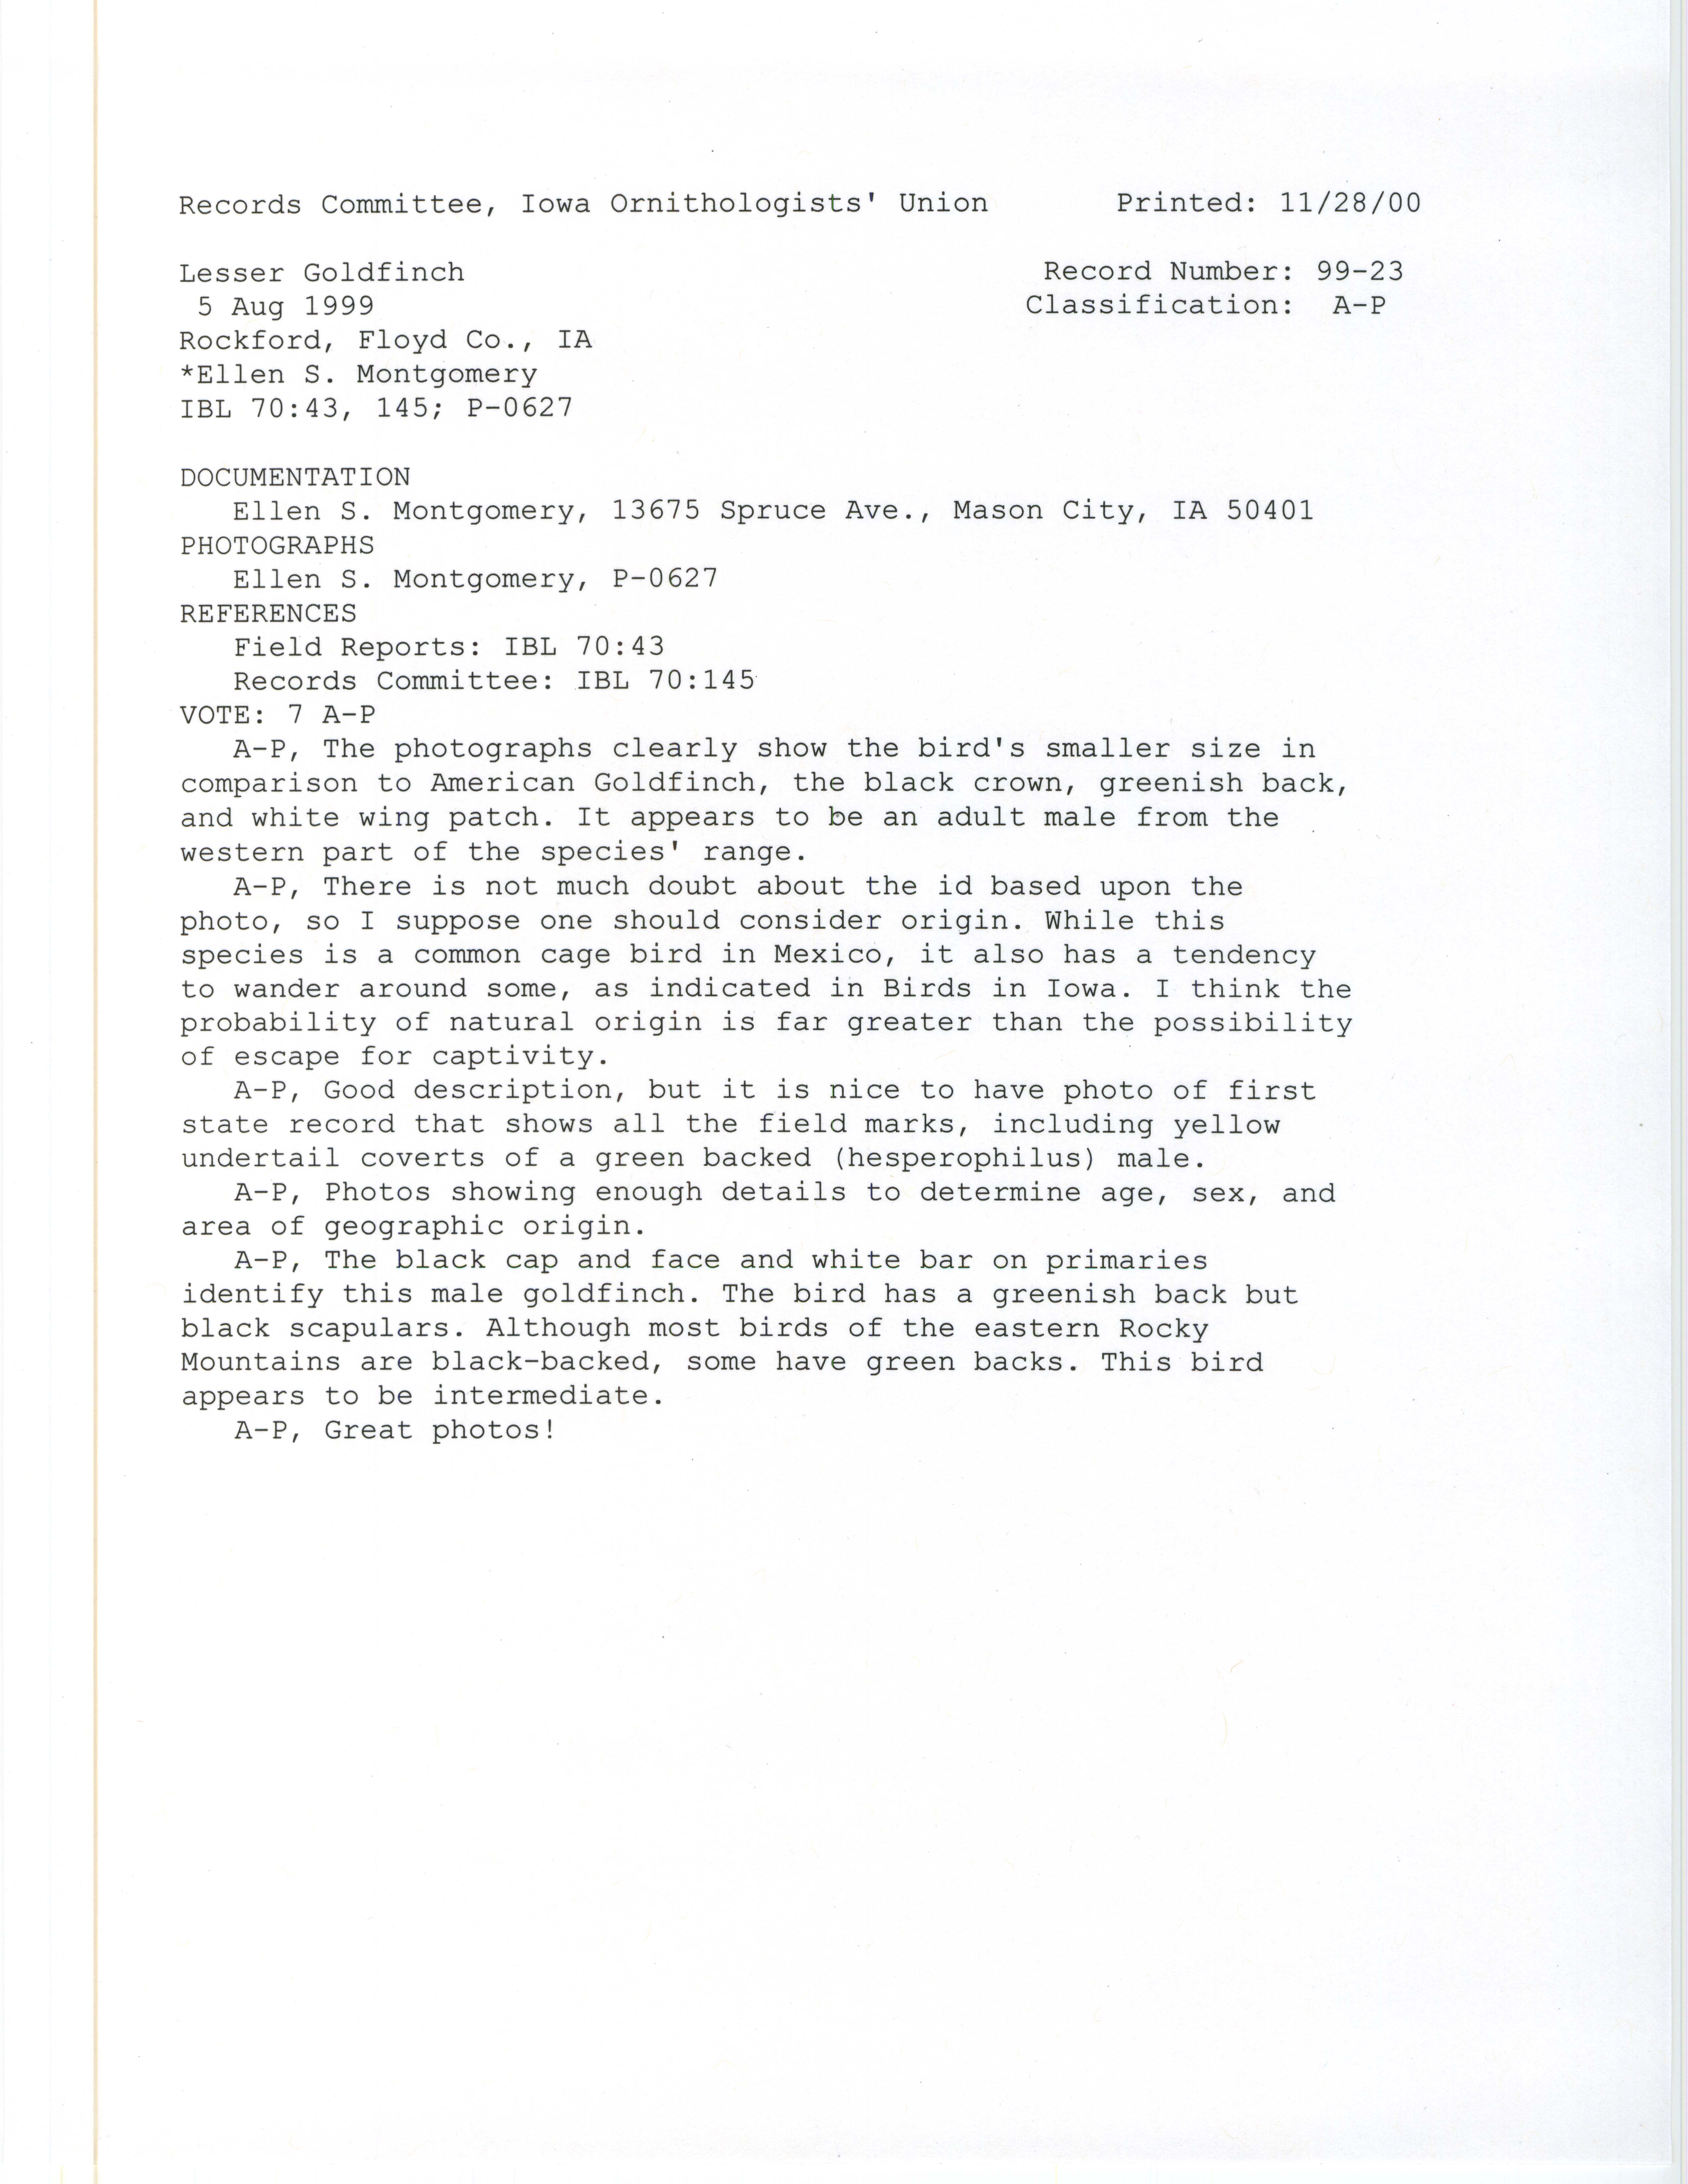 Records Committee review for rare bird sighting for Lesser Goldfinch at Rockford, 1999